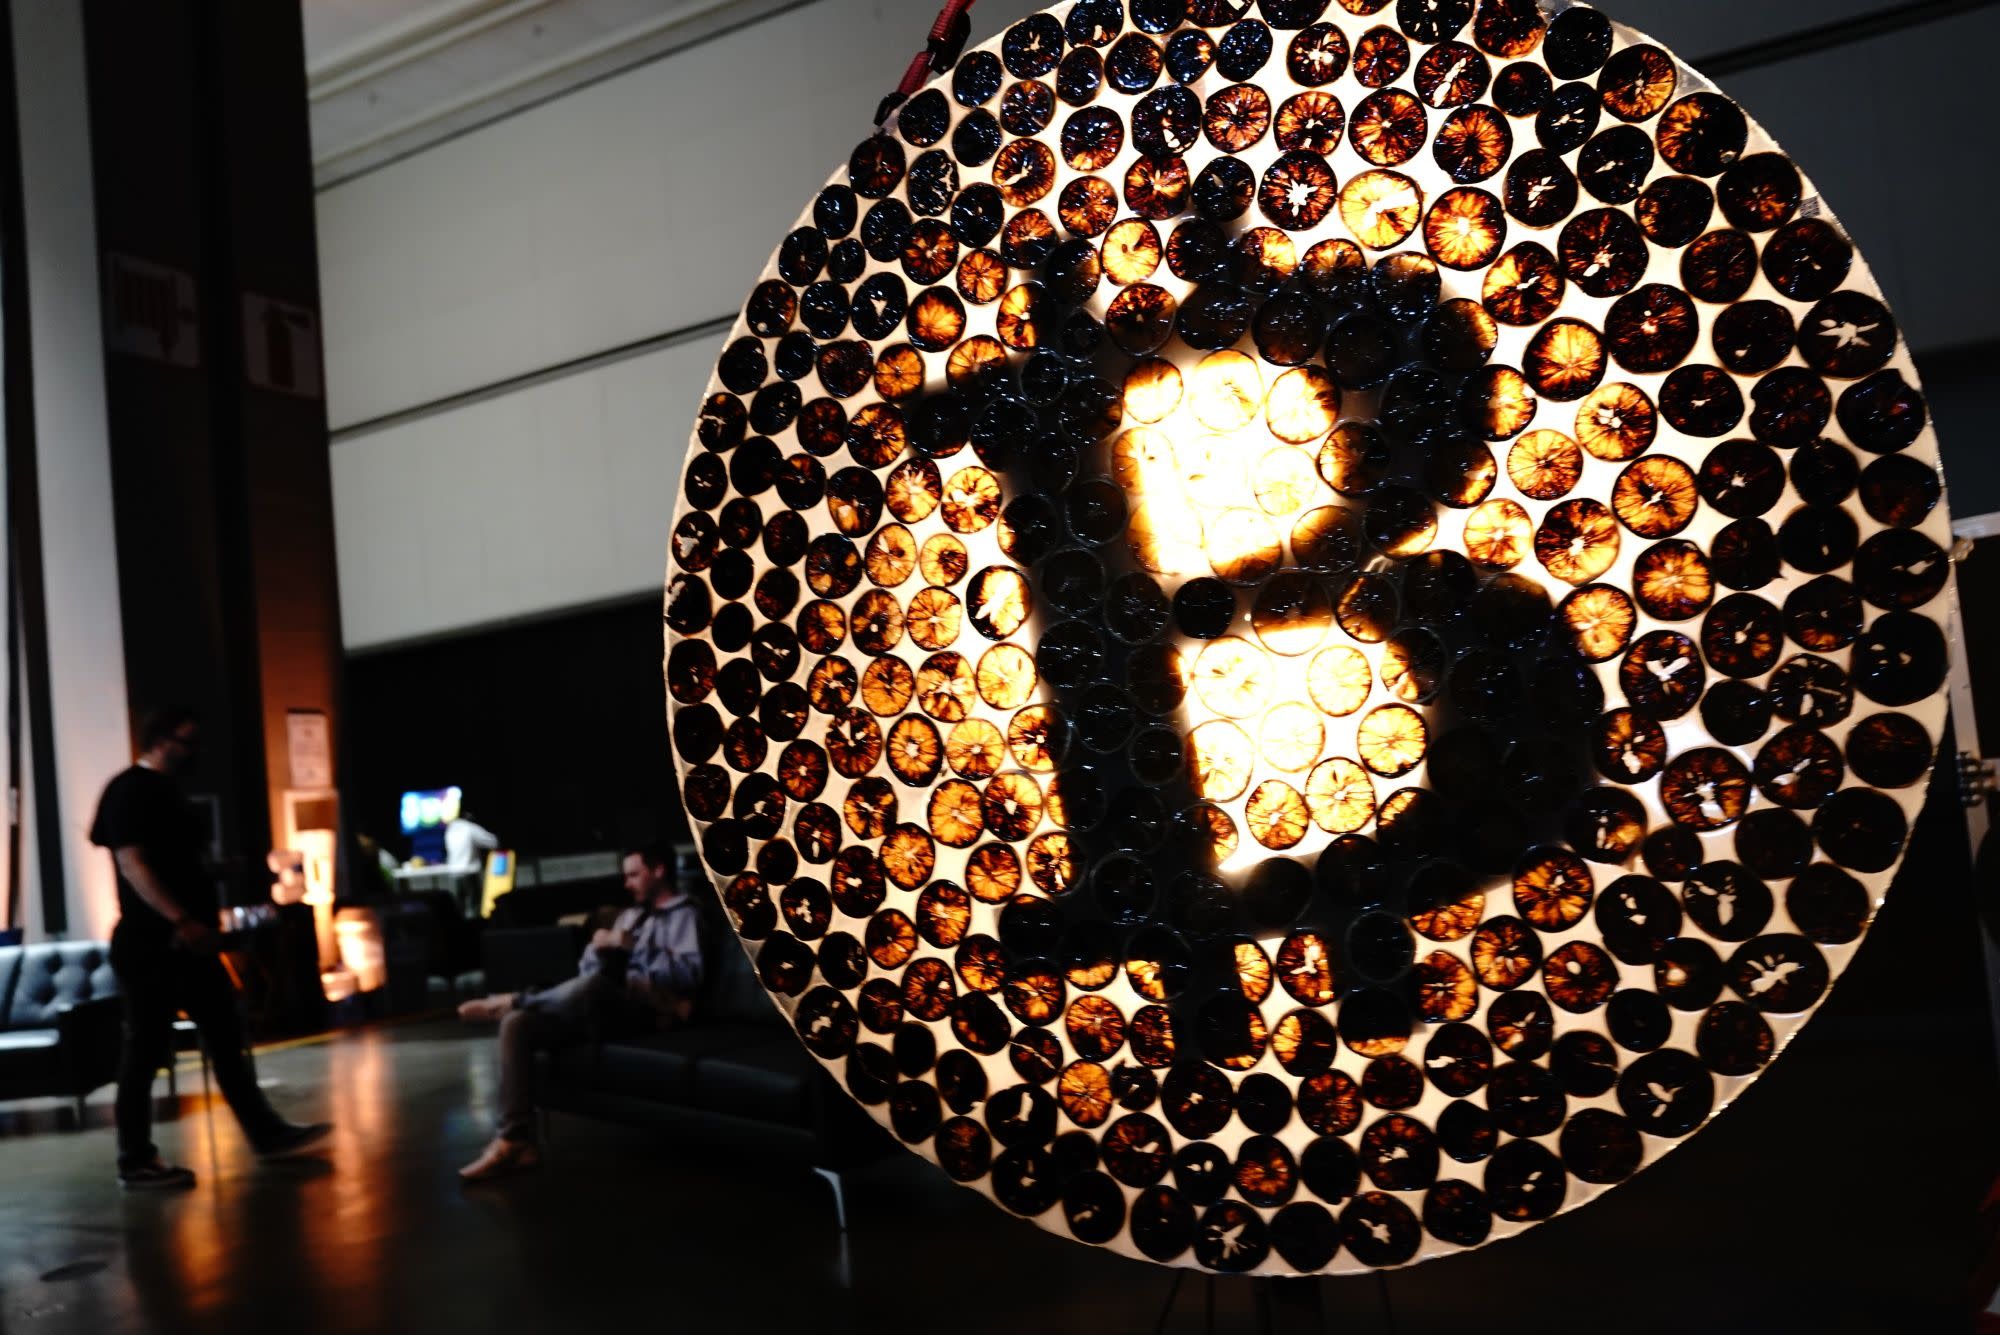 Bitcoin’s Plunge Exposes Idea of Uncorrelated Asset as ‘Big Lie’